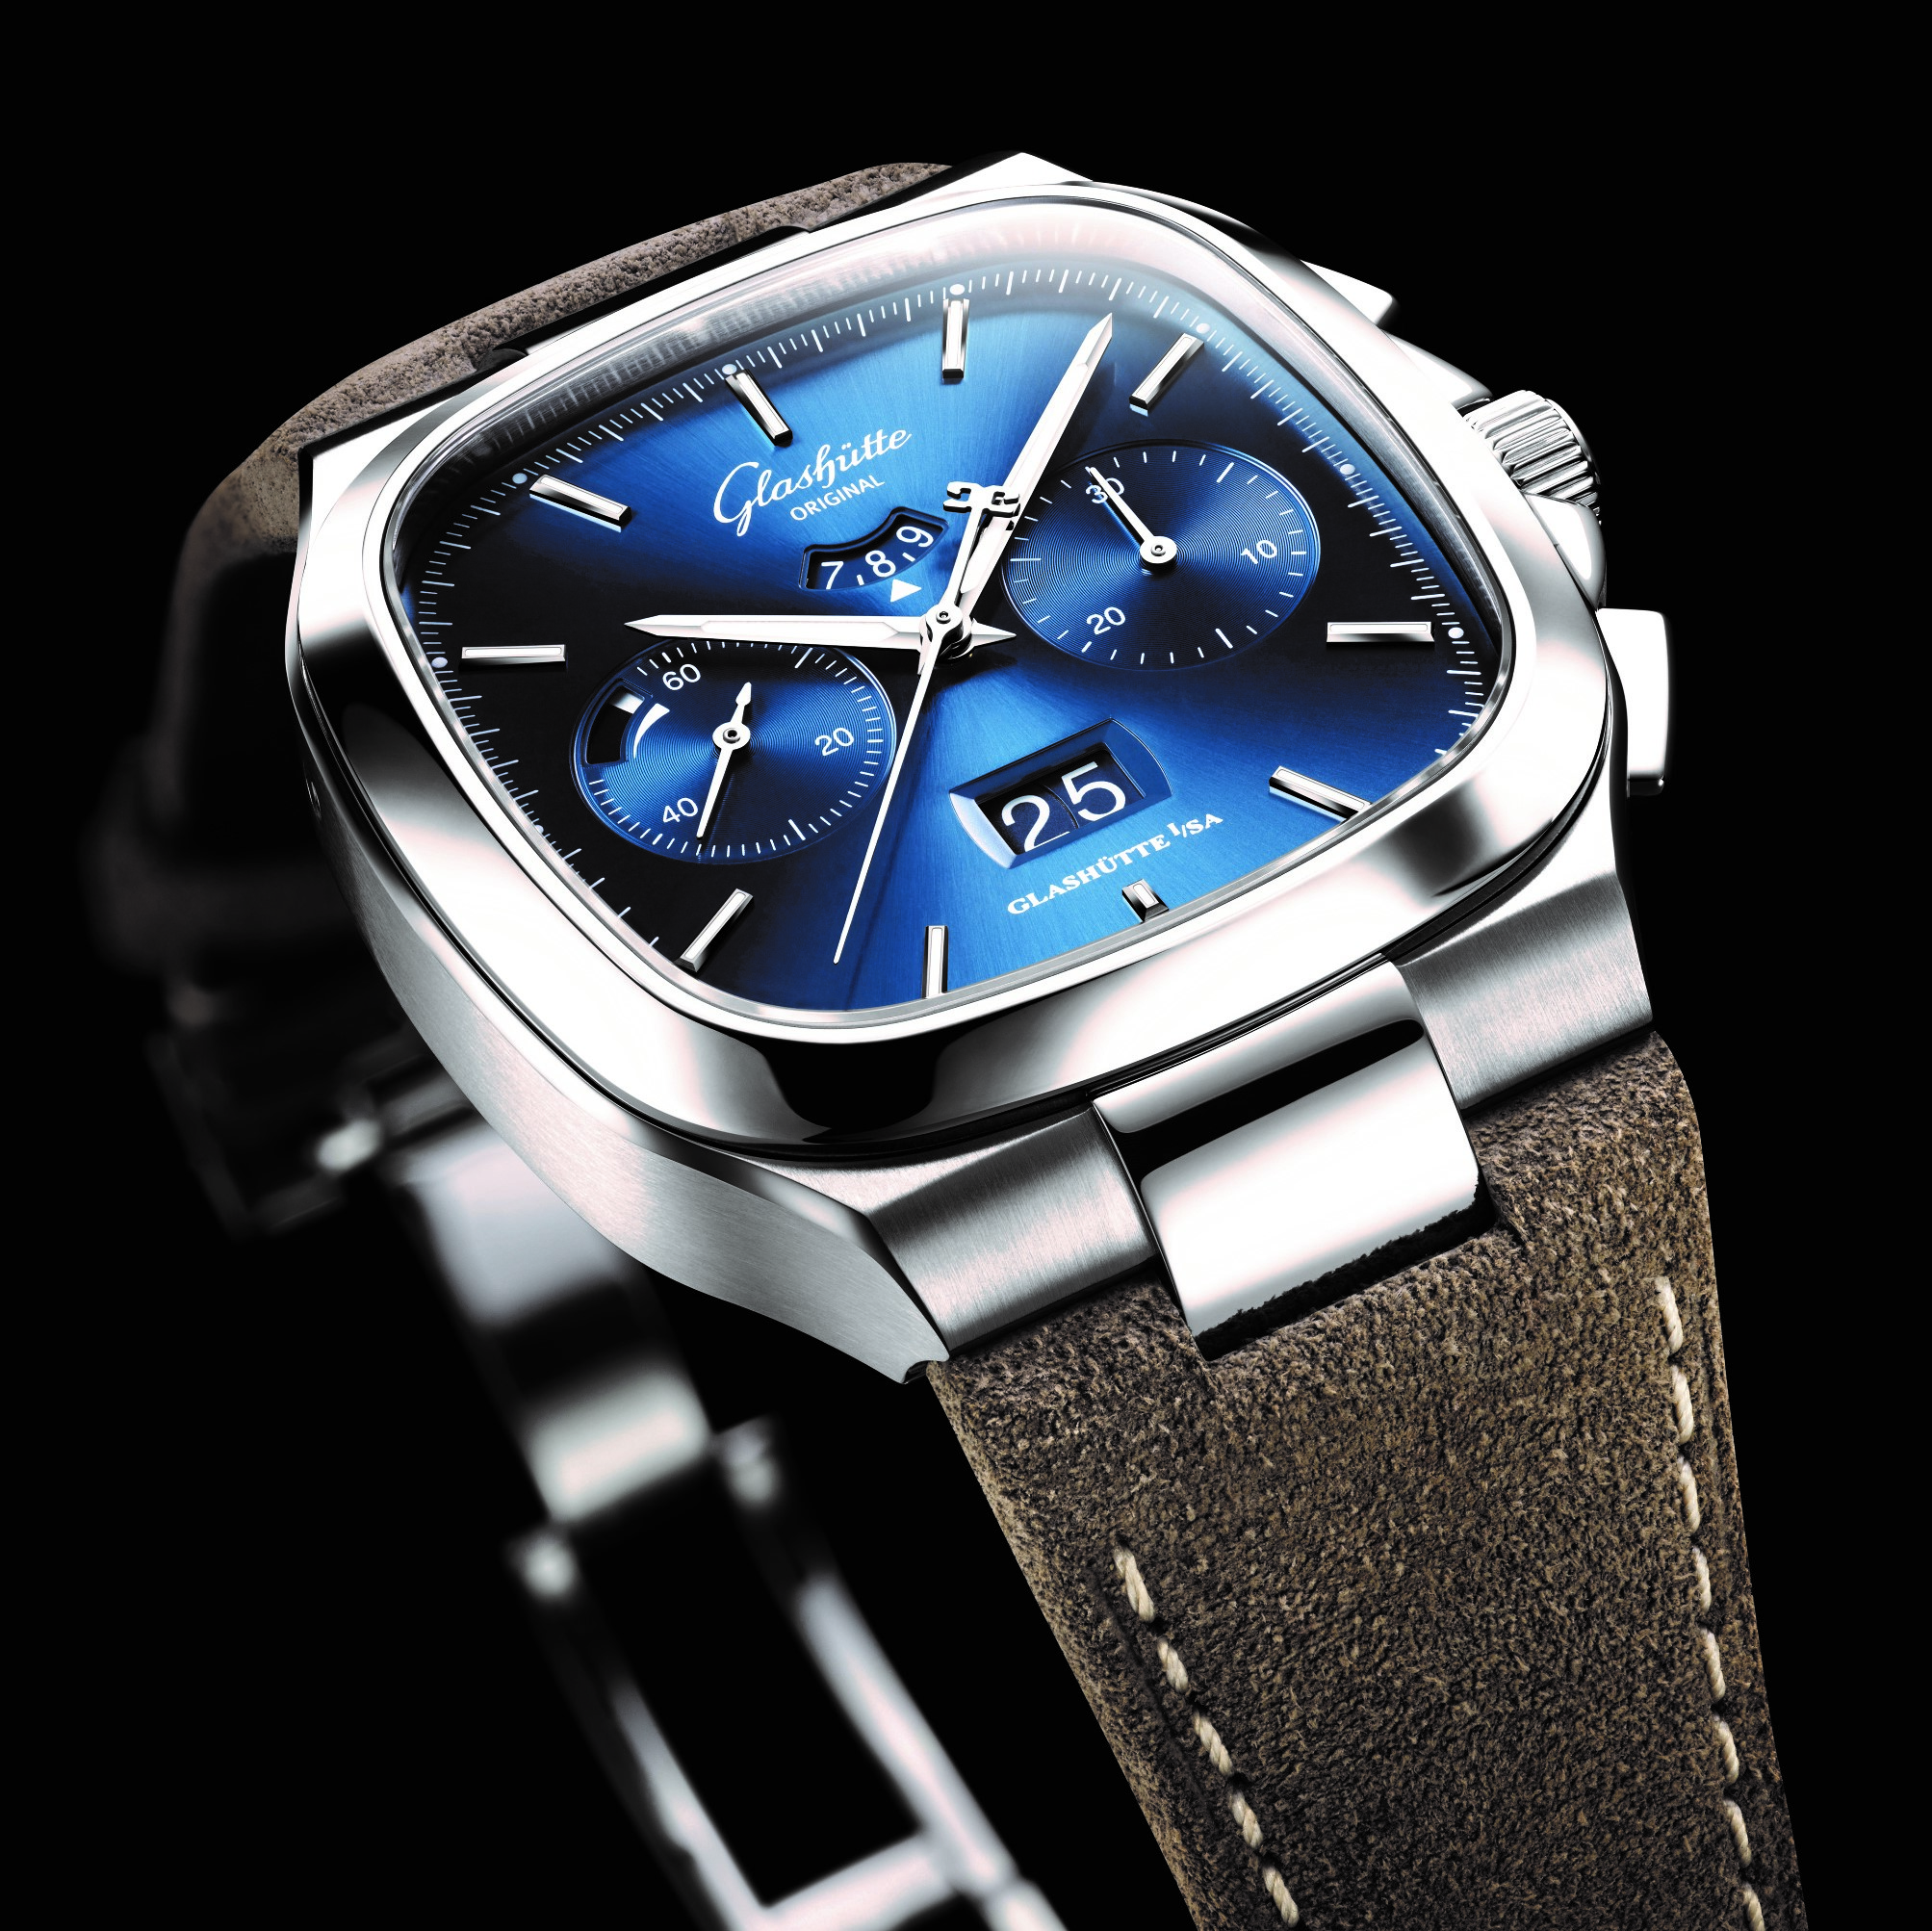 Sponsored: Glashütte Original Launches the Seventies Chronograph Panorama Date in Blue